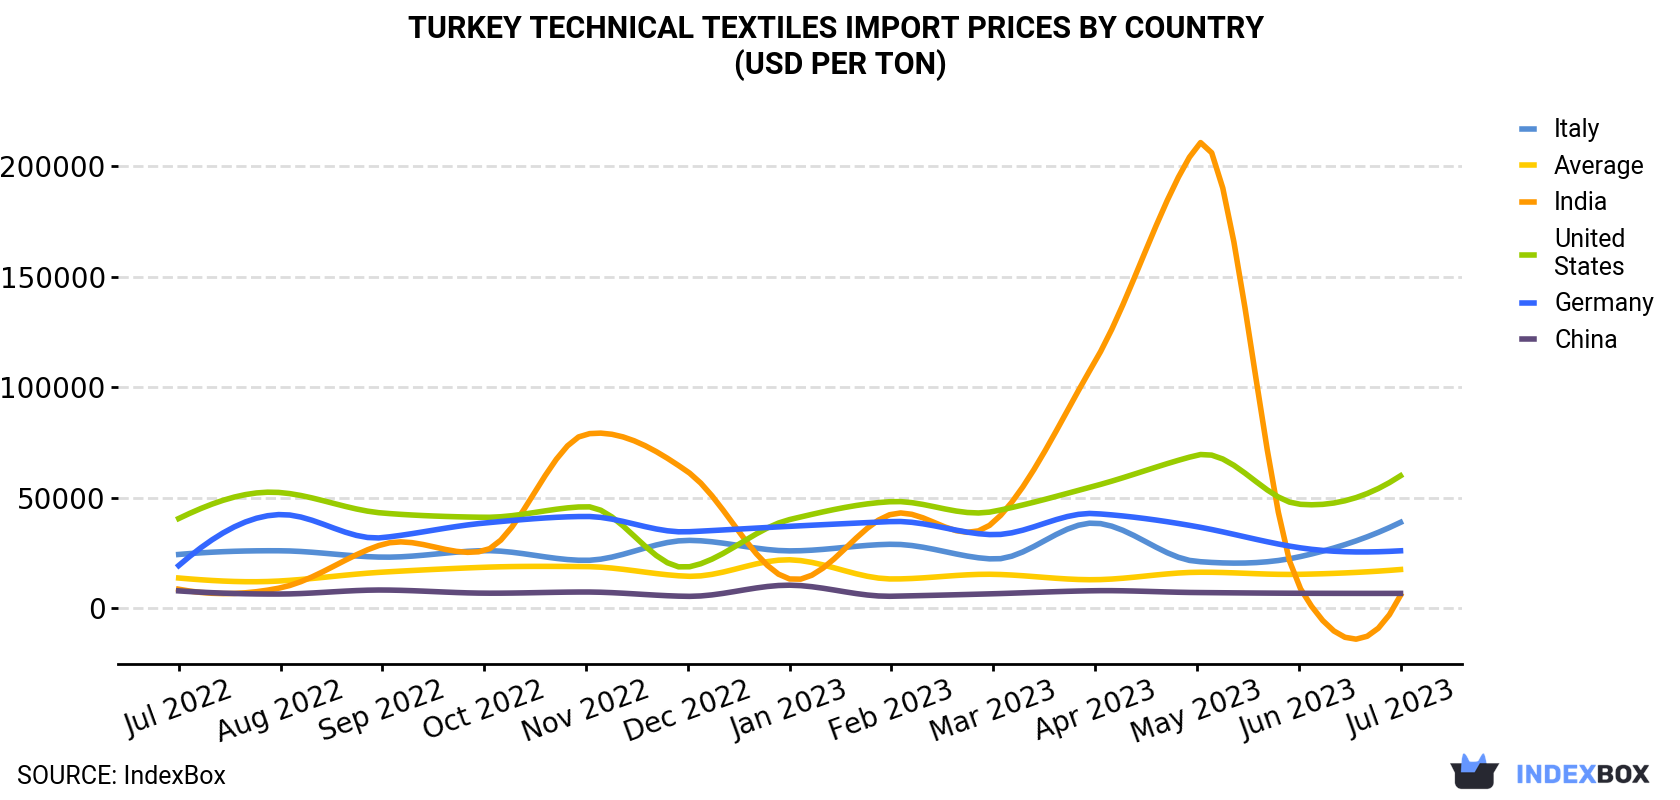 Turkey Technical Textiles Import Prices By Country (USD Per Ton)